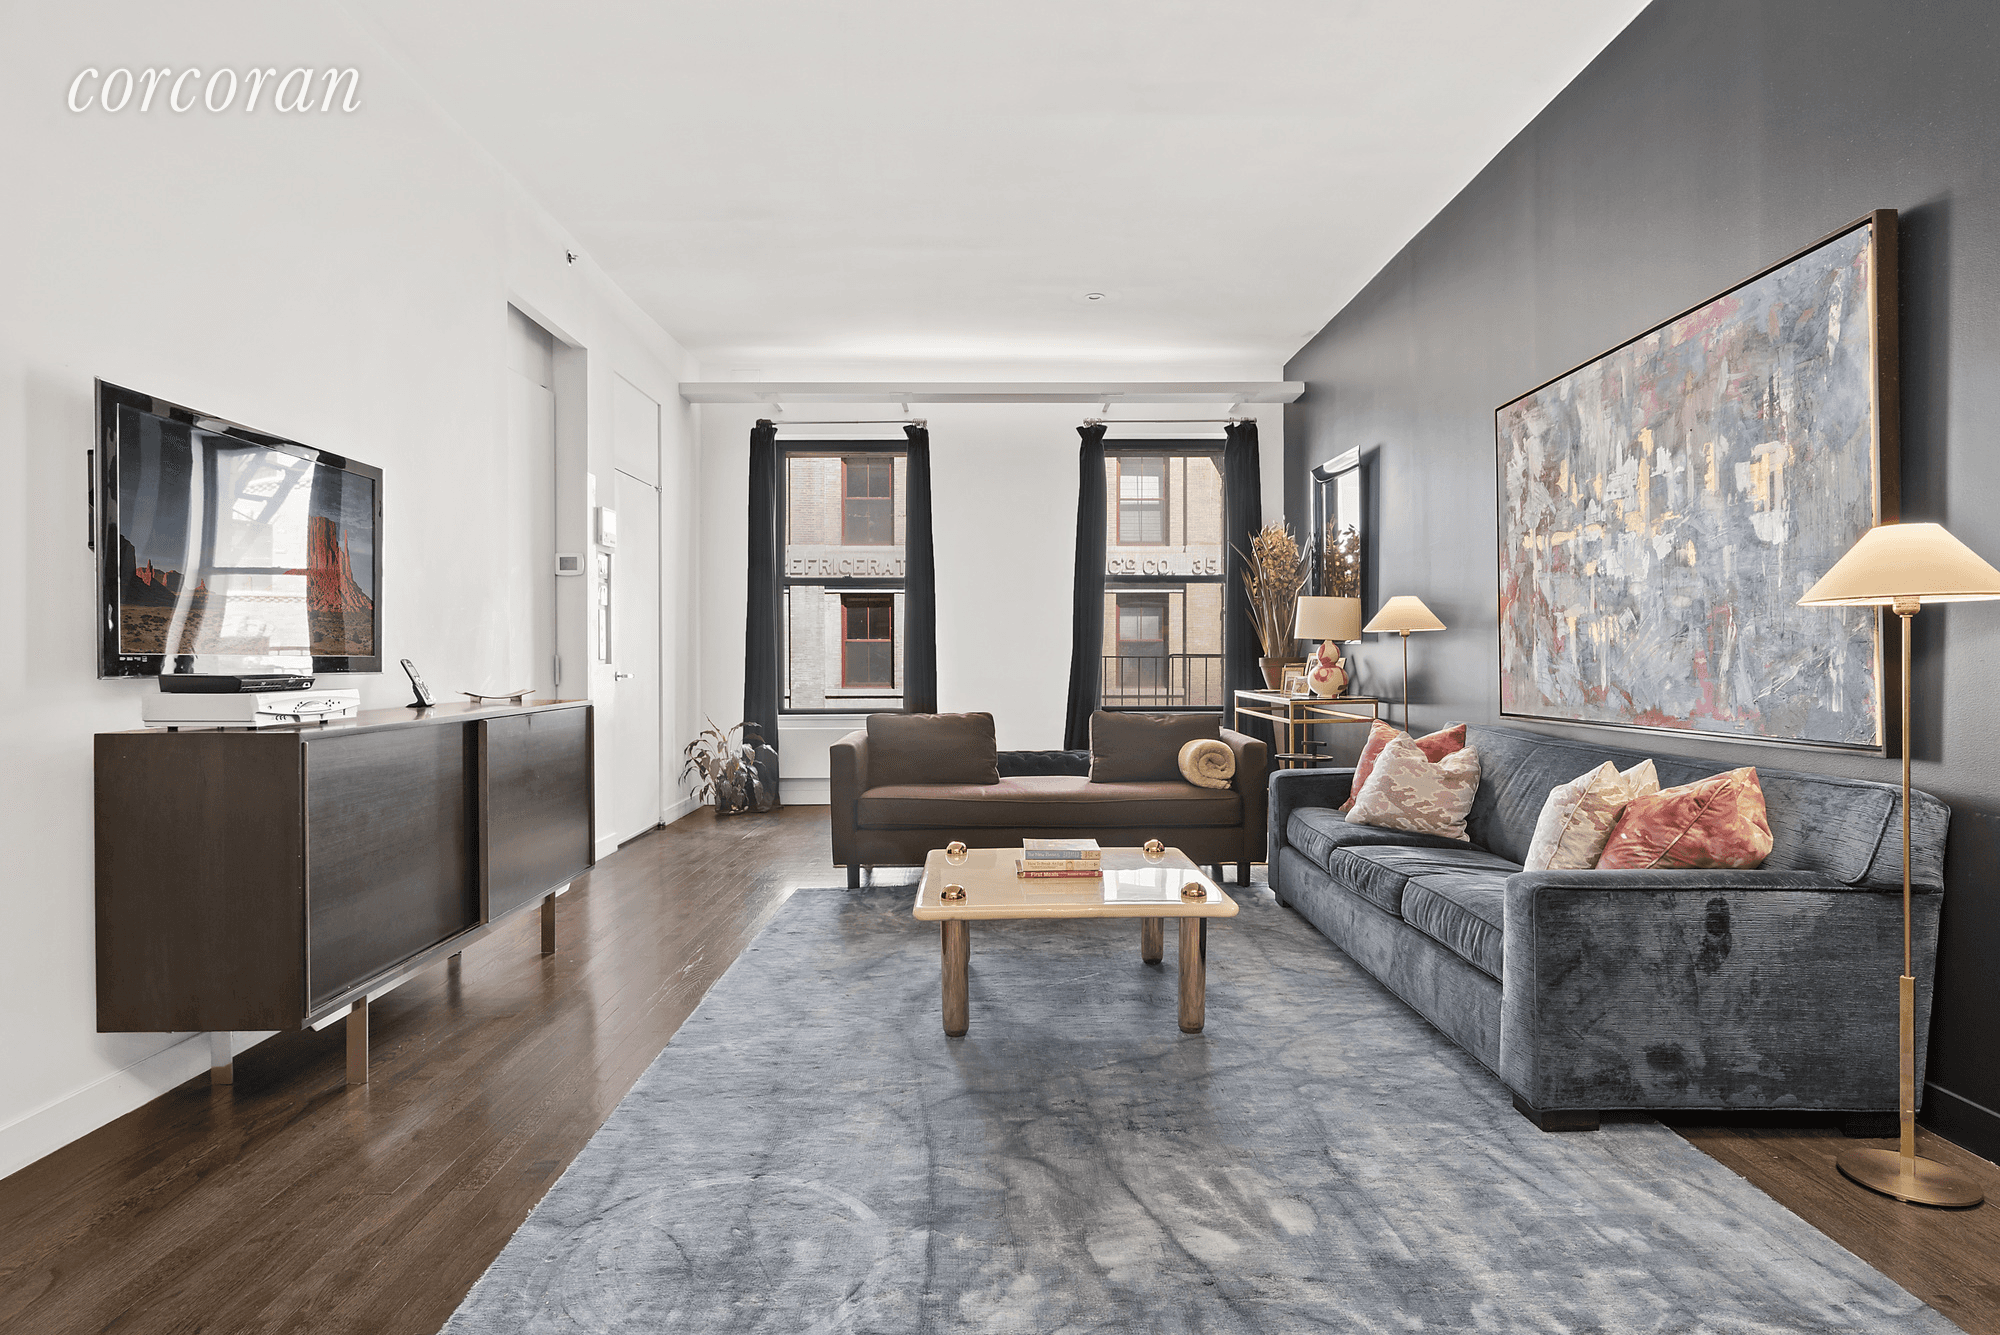 Classic loft living on one of Tribeca's best streets is yours in this two bedroom plus bonus room in a boutique co op.